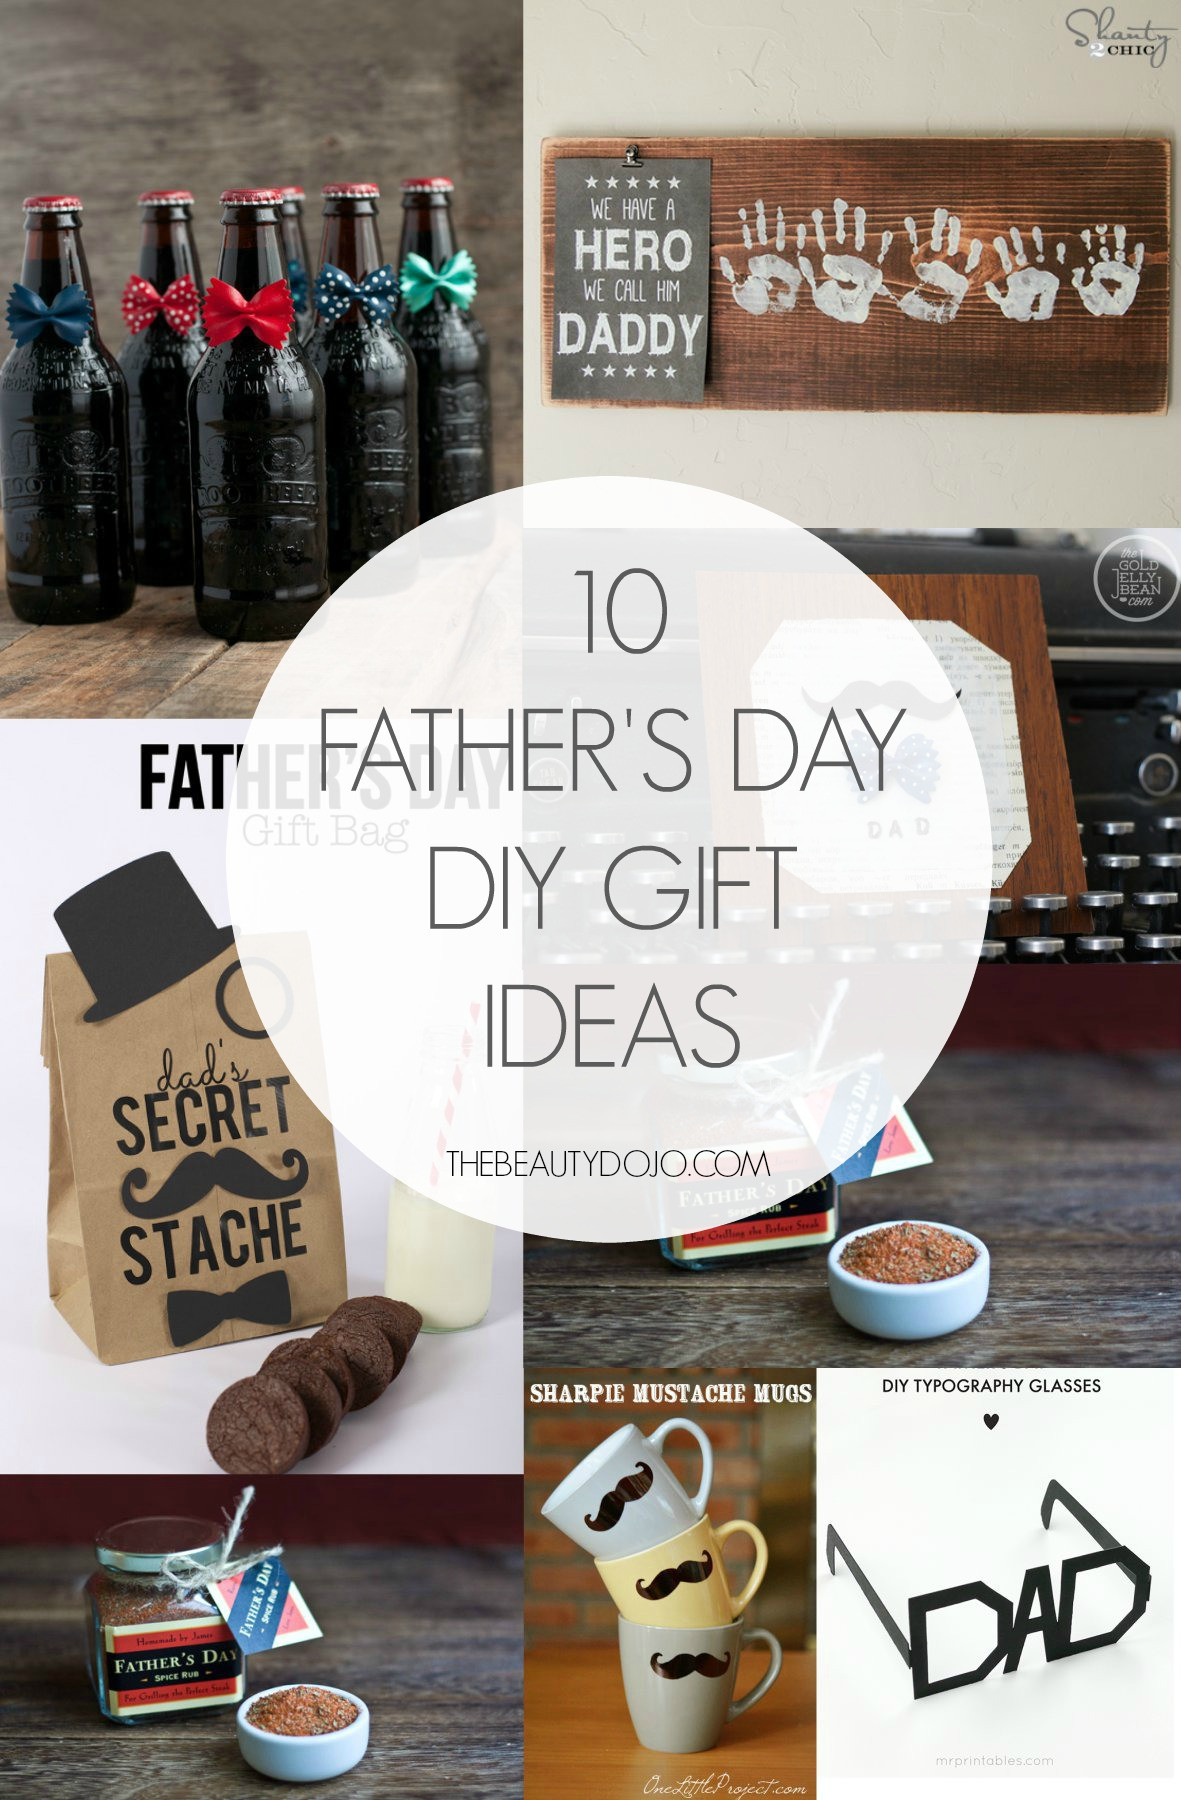 Fathersday Gift Ideas
 10 Father s Day DIY Gift Ideas The Beautydojo